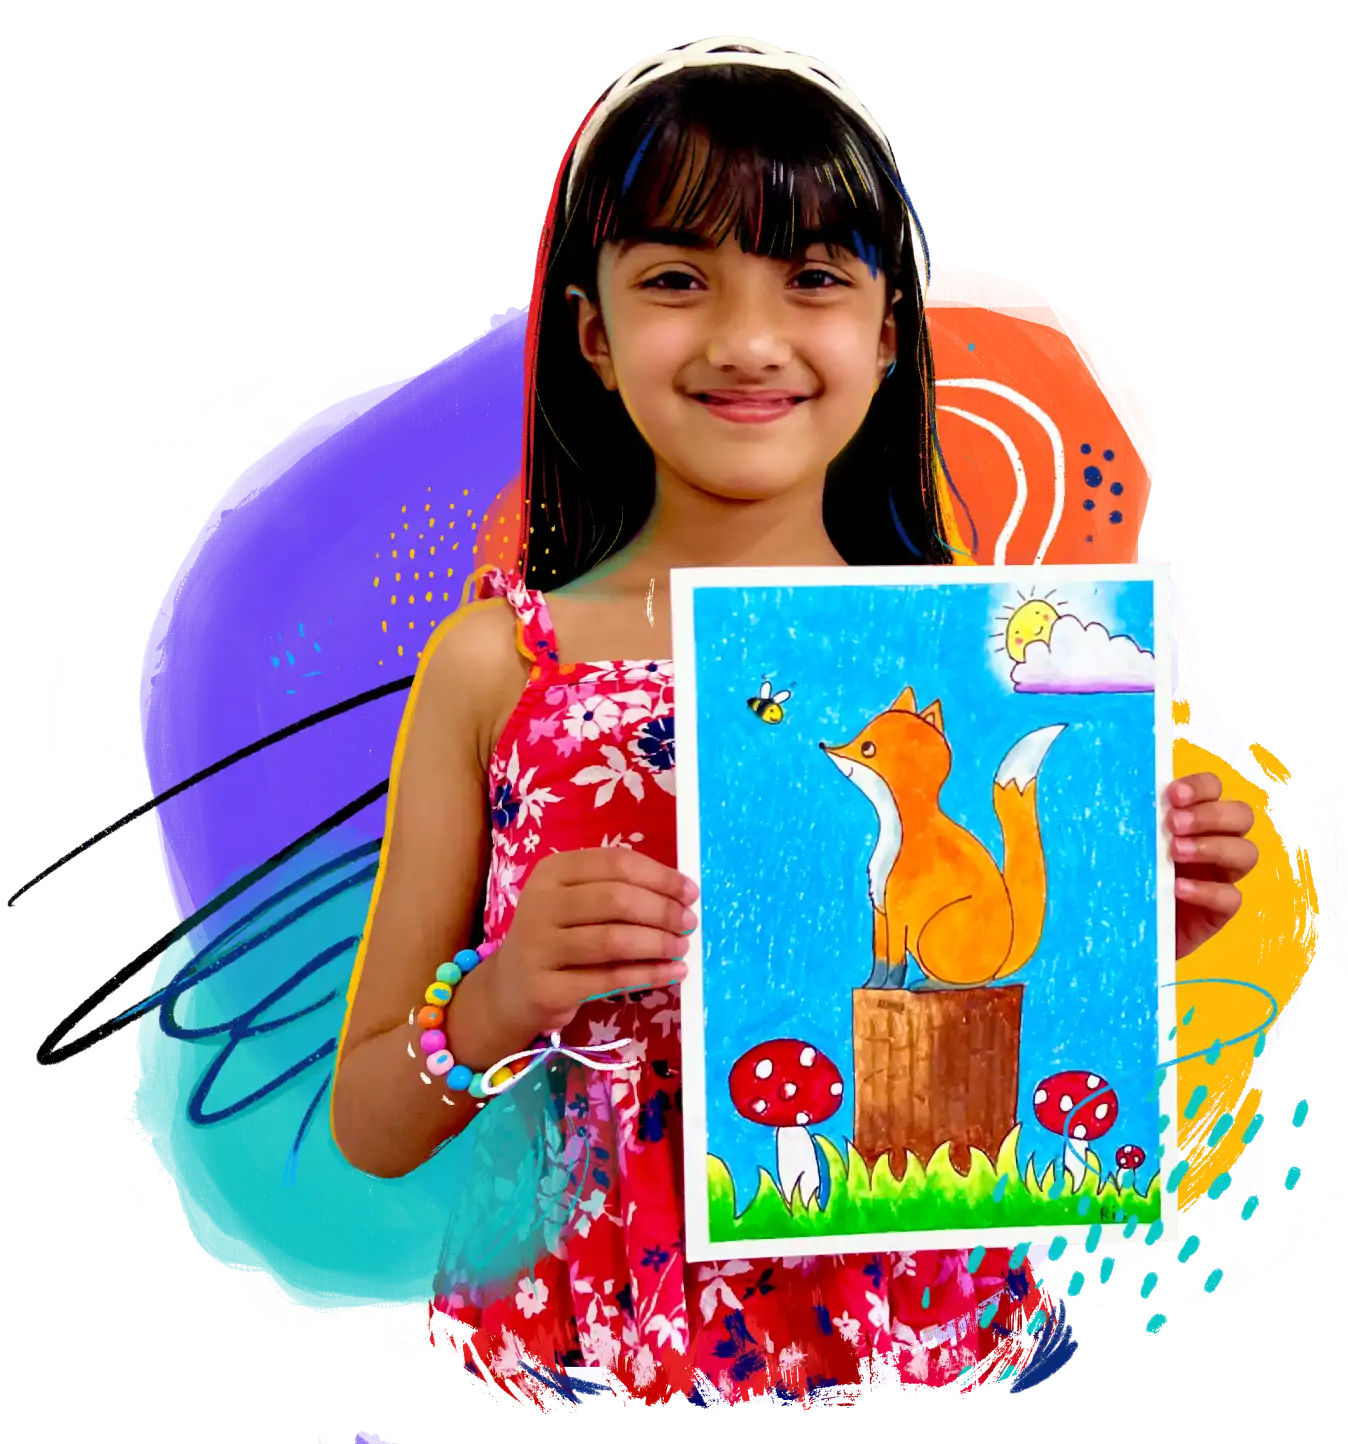 Painting For Kids Classes Online